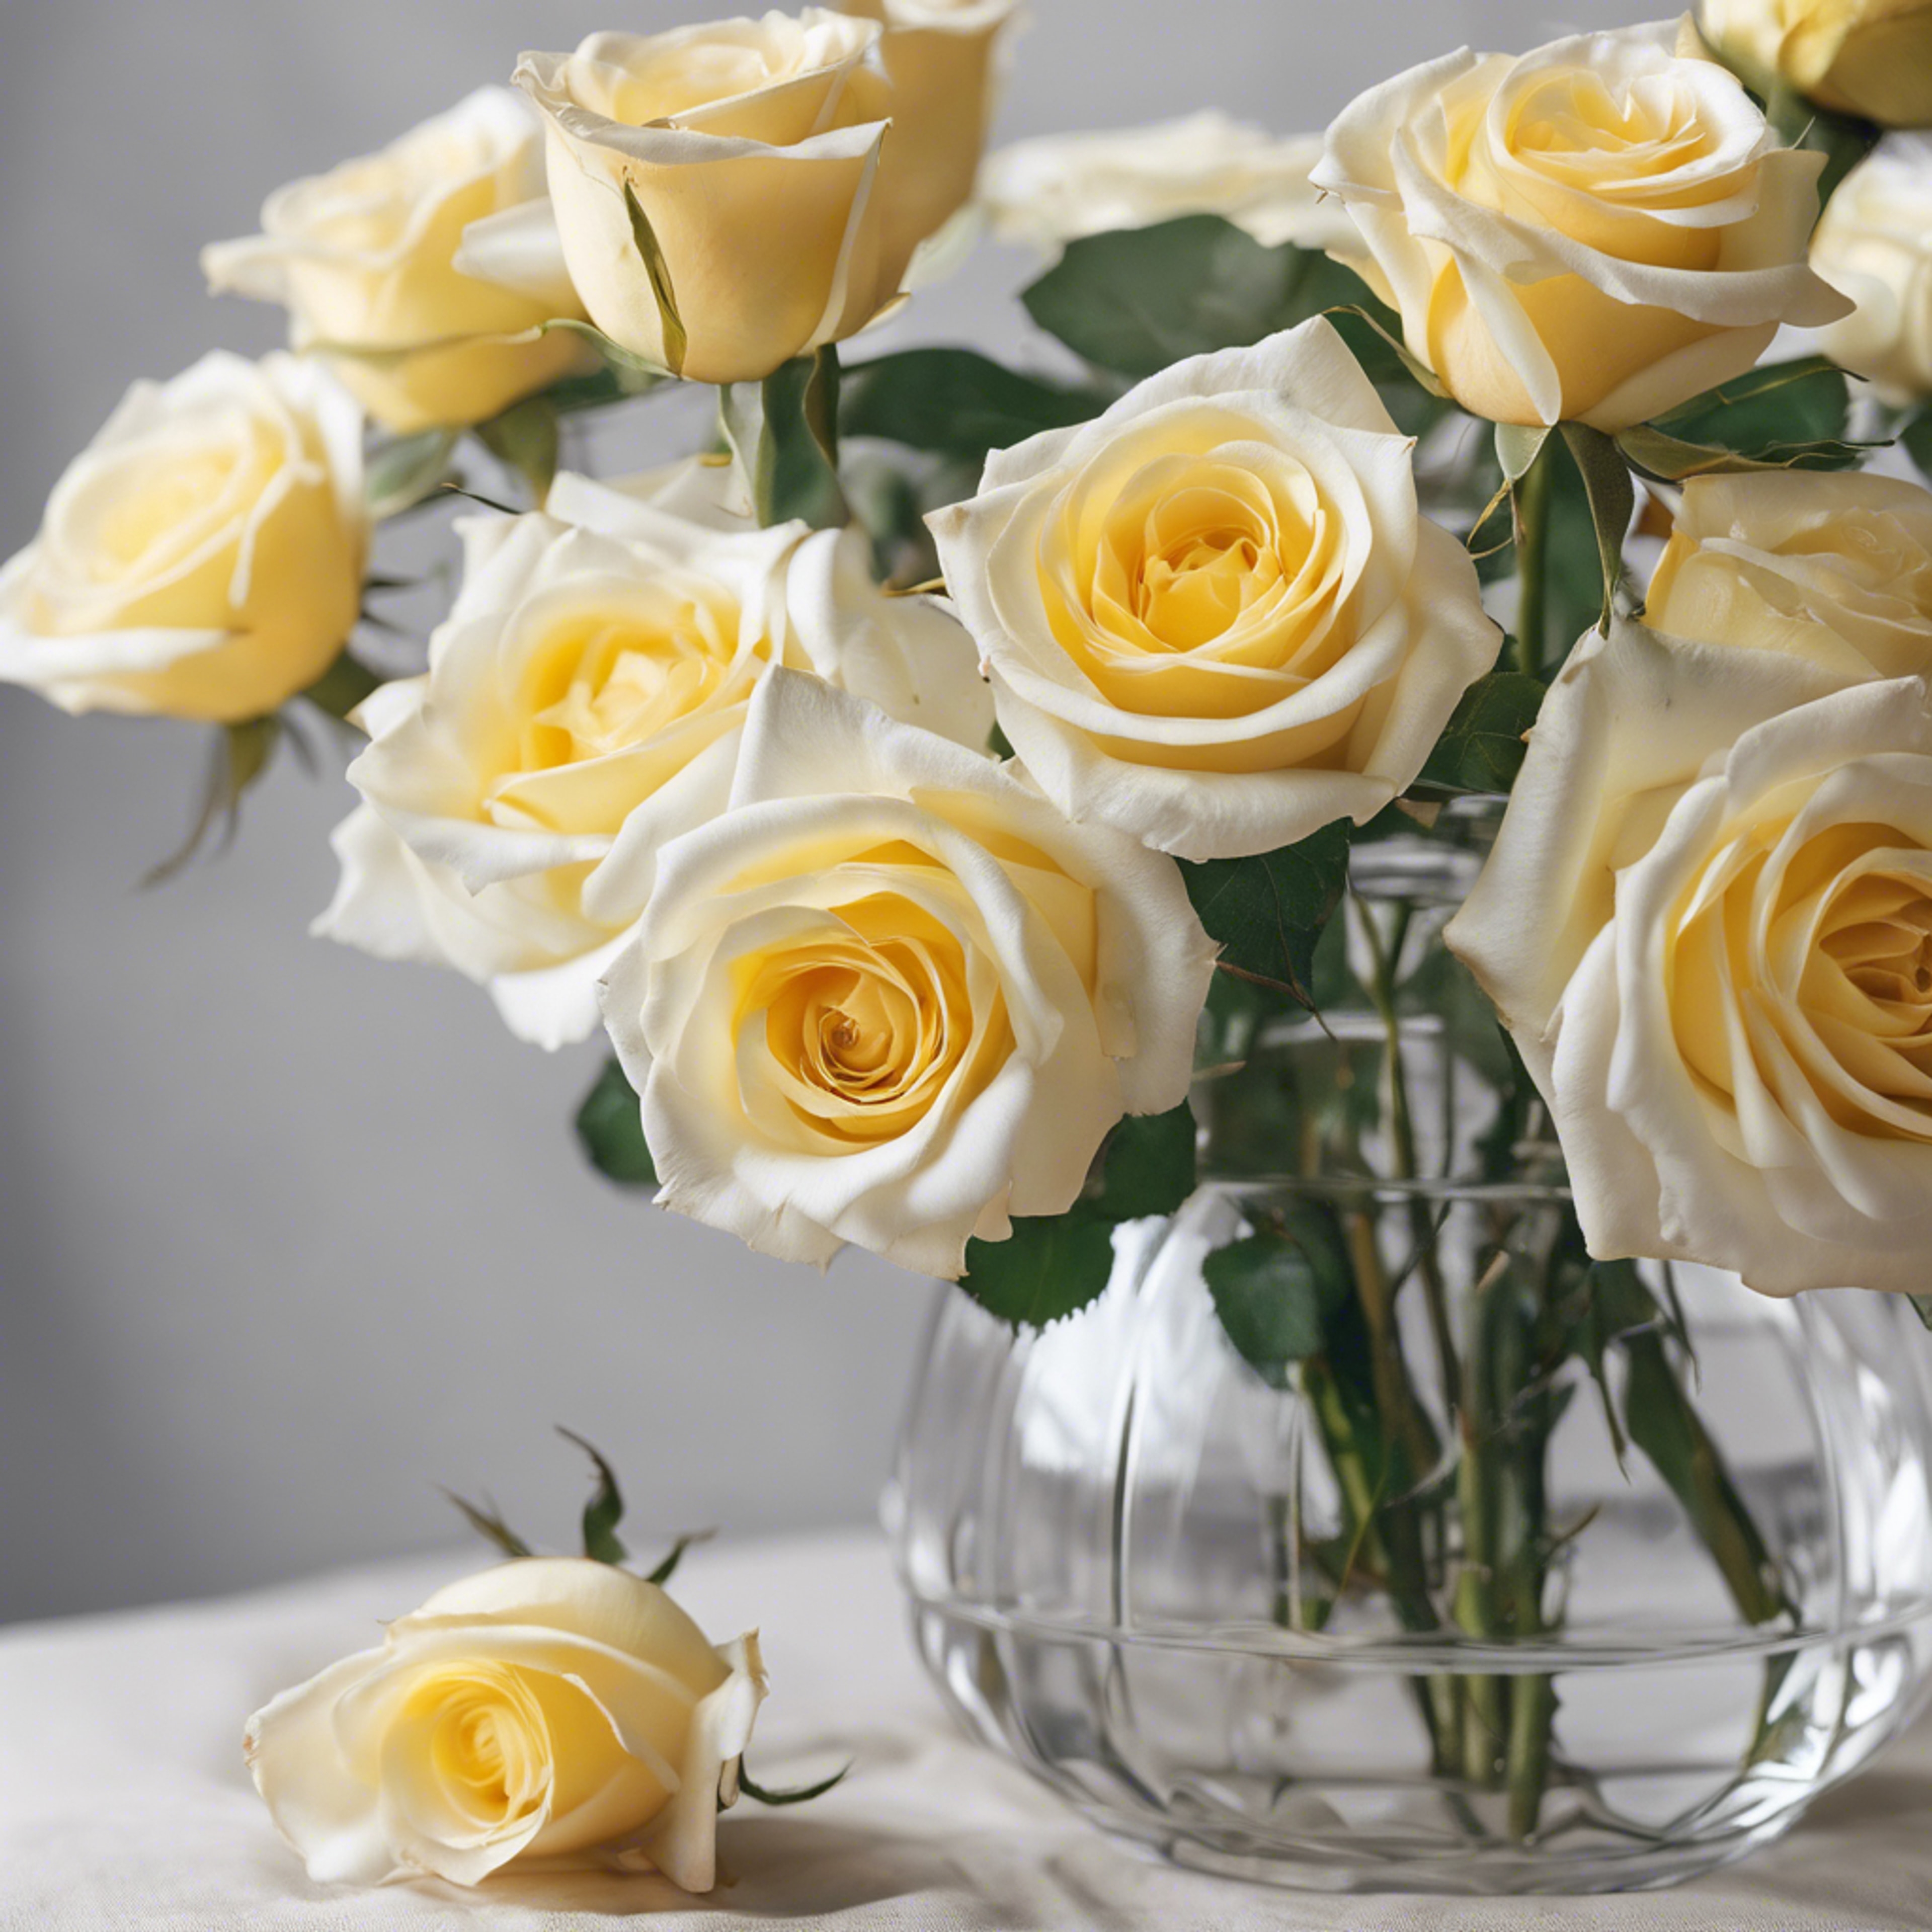 A beautiful array of luminescent white and yellow roses in a crystal clear vase. Tapet[29c0e485a0b1412795b9]